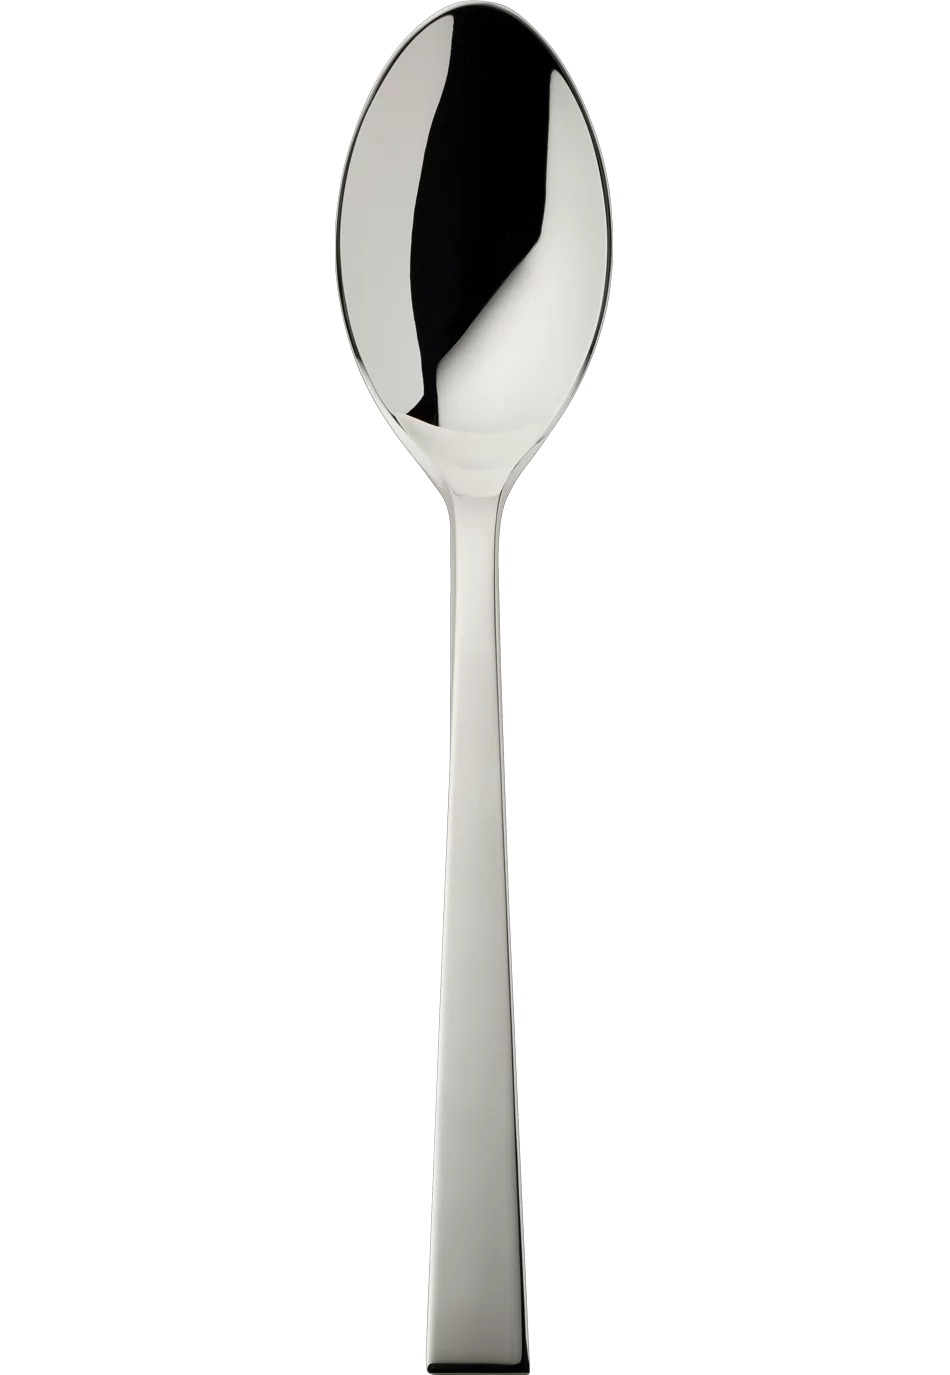 Riva Compote/Salad Serving Spoon, large (150g massive silverplated)